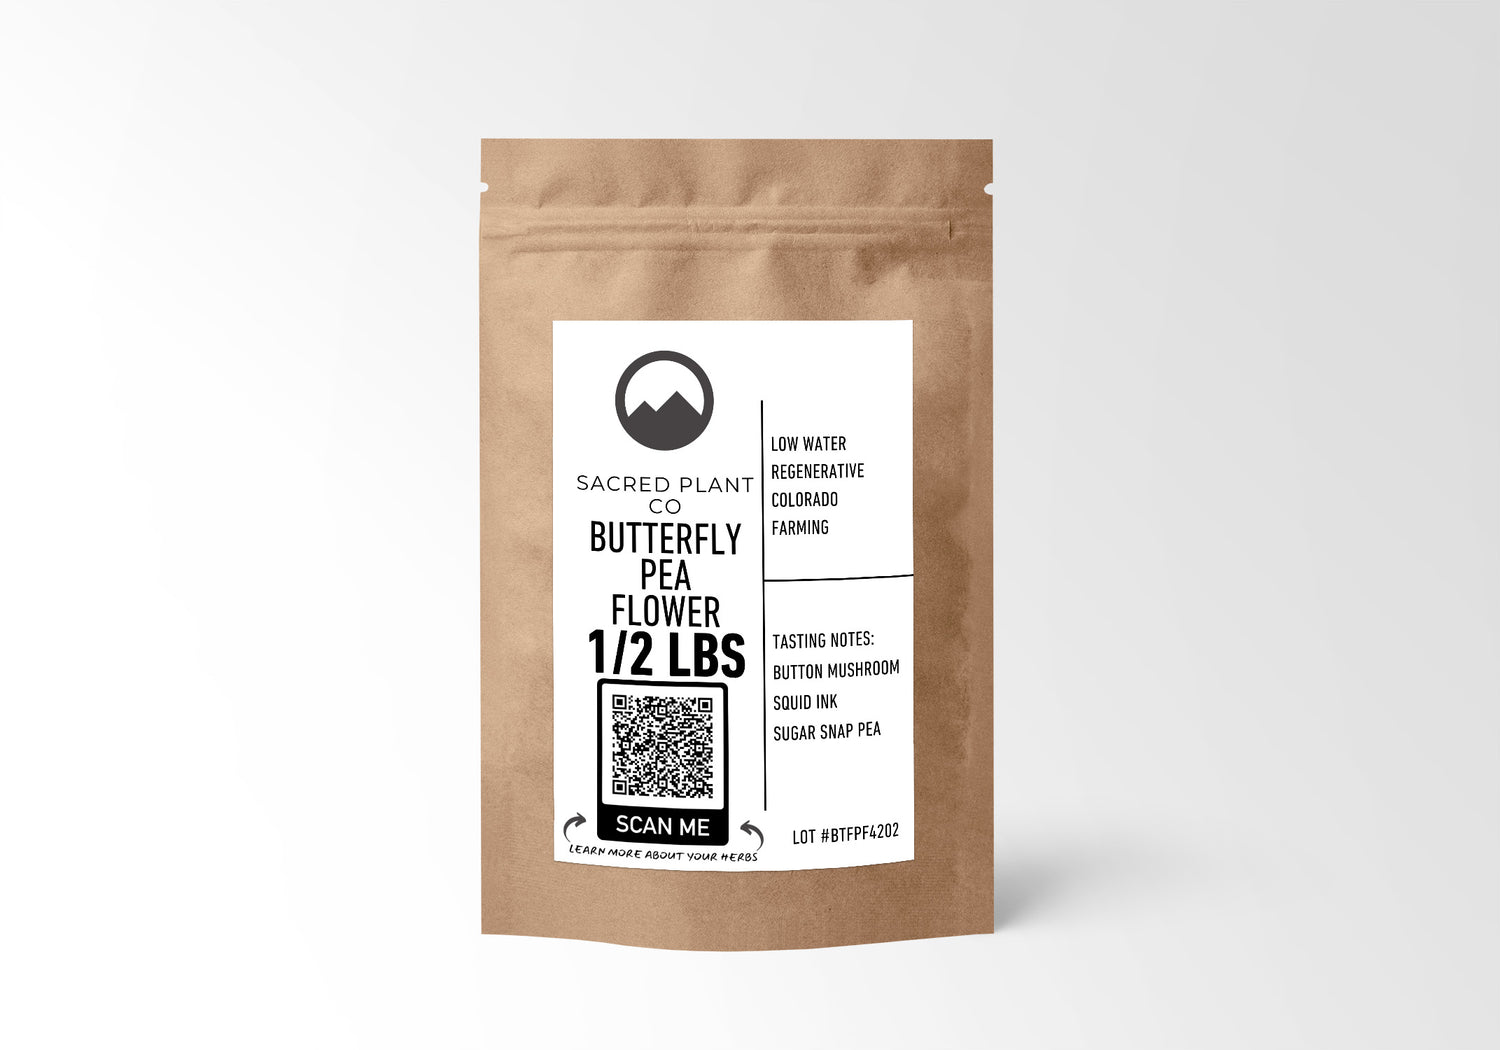 Premium Butterfly Pea Flower Tea - Bulk Dried Flowers for Natural Herbal Infusions